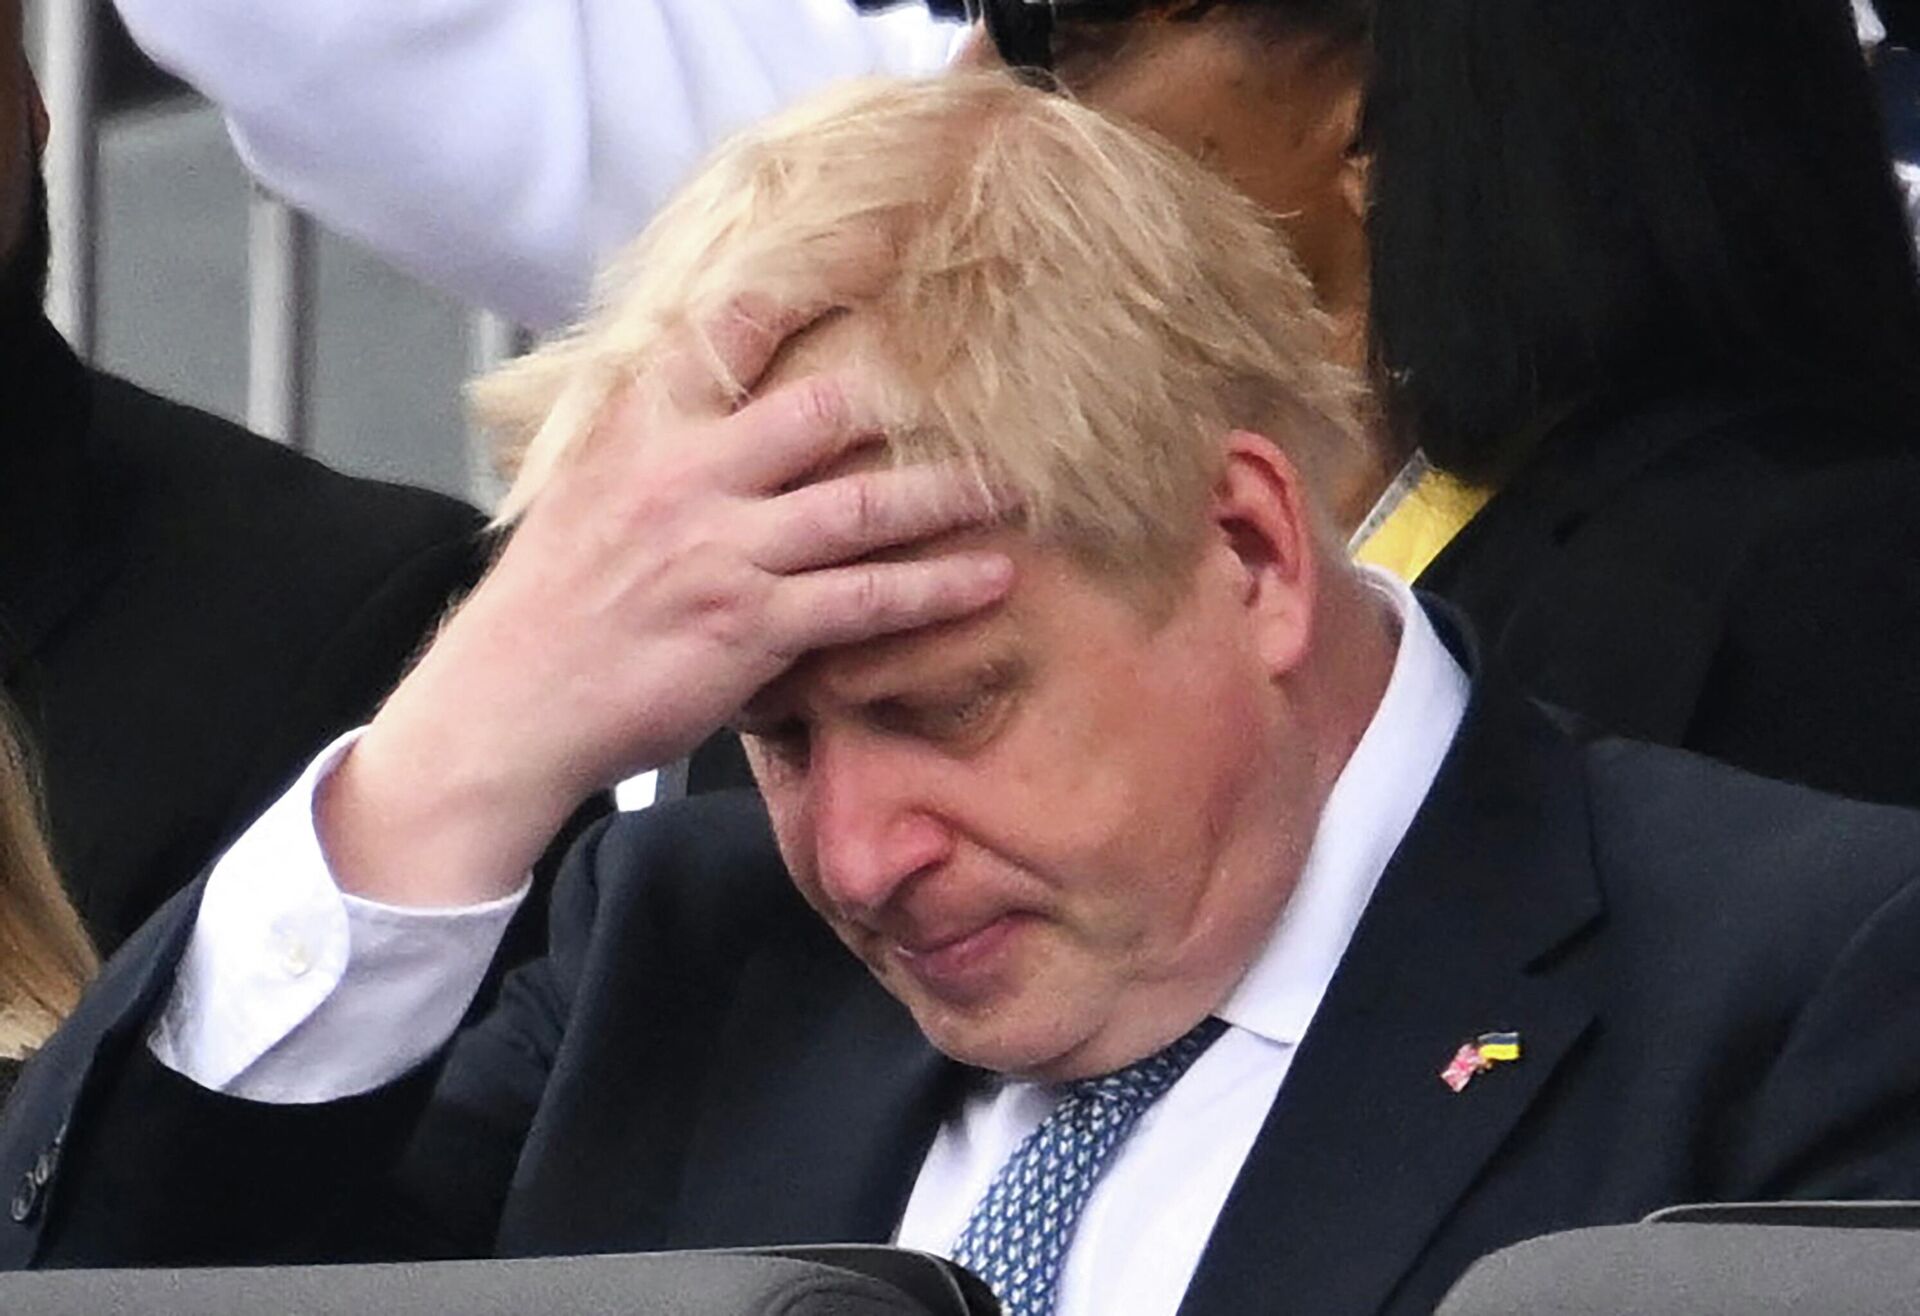 (FILES) In this file photo taken on June 5, 2022 shows Britain's Prime Minister Boris Johnson reacts during the Platinum Pageant in London on June 5, 2022 as part of Queen Elizabeth II's platinum jubilee celebrations - Sputnik International, 1920, 20.06.2022